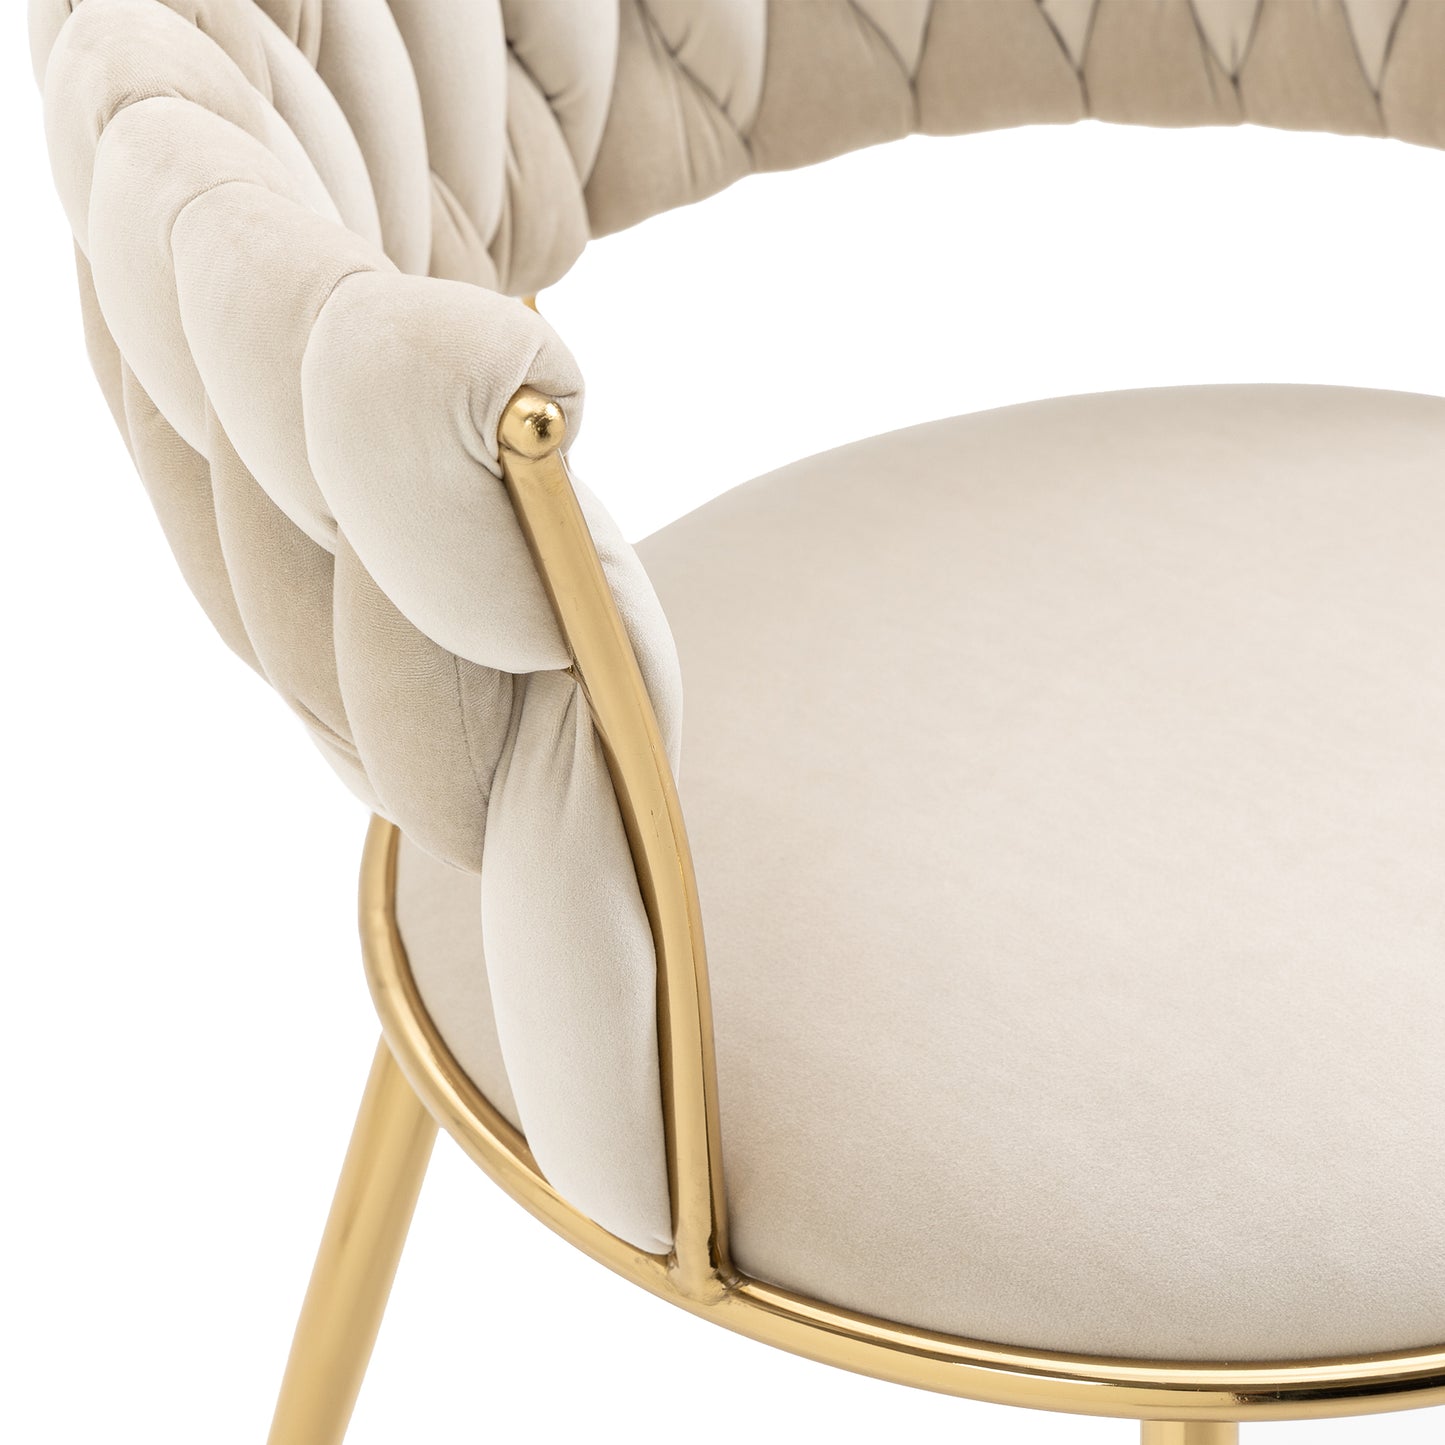 Florence Dining Chair 2PC Ivory